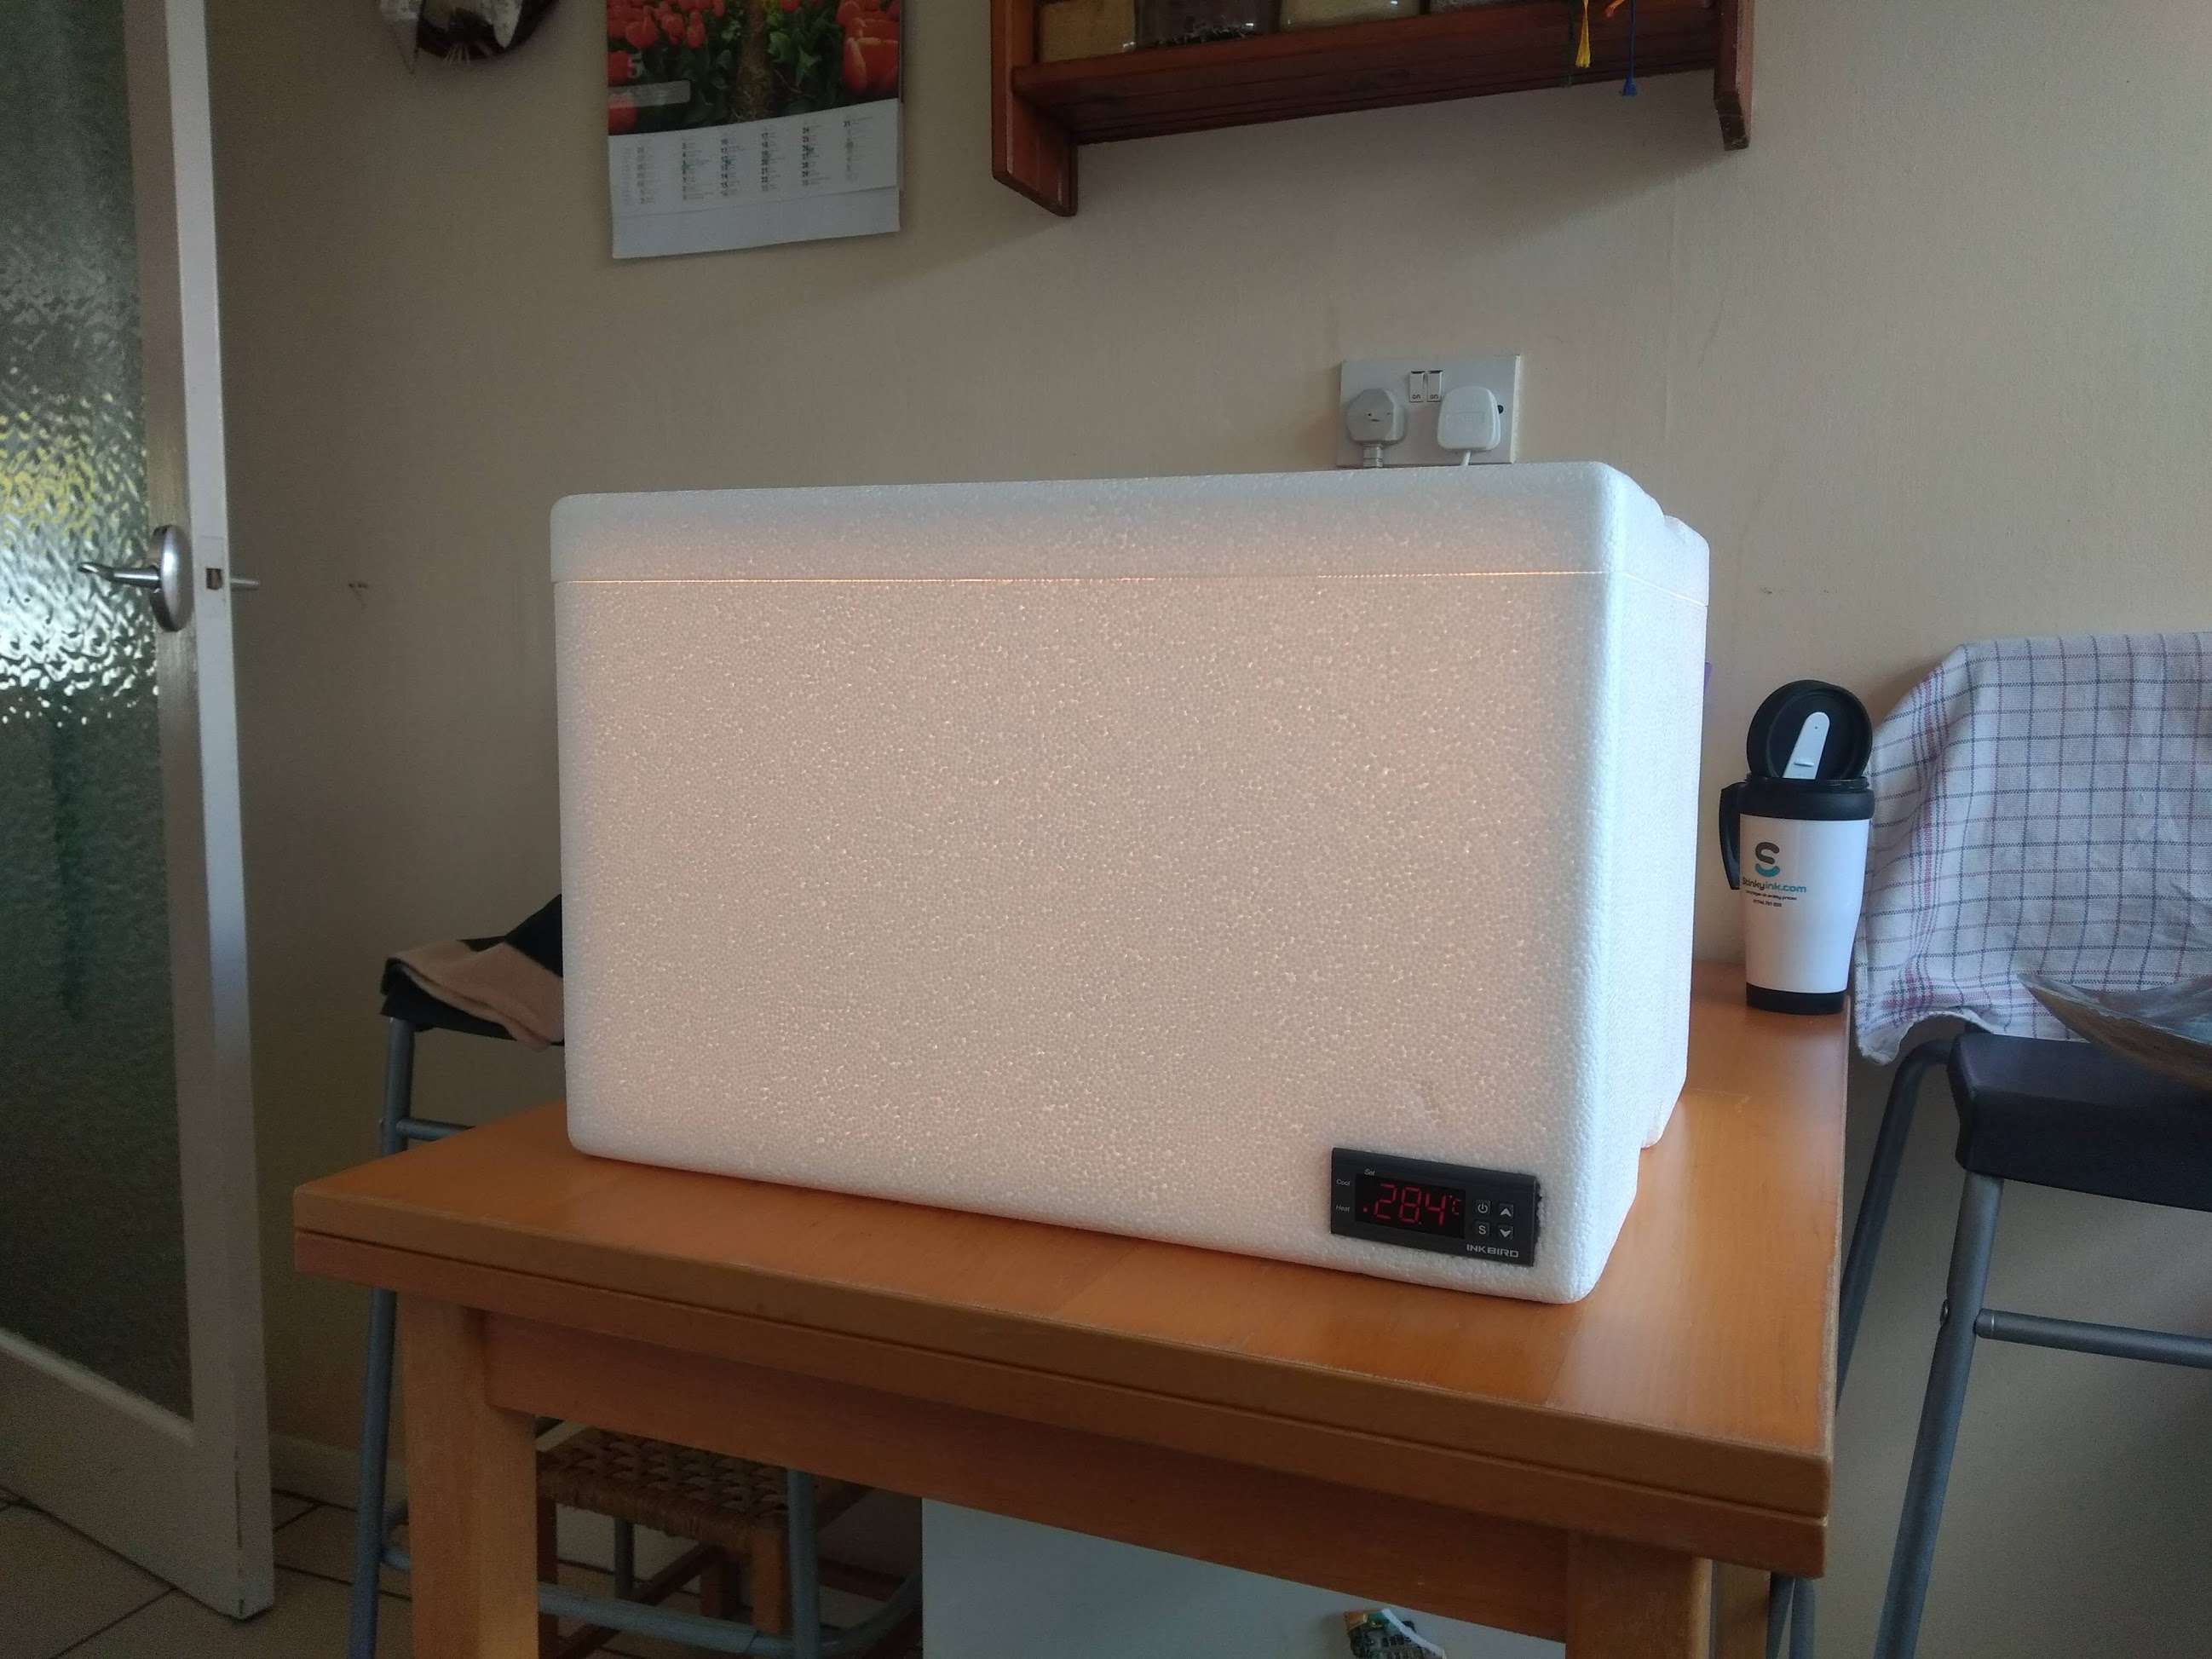 How to build an electric bread proofing box